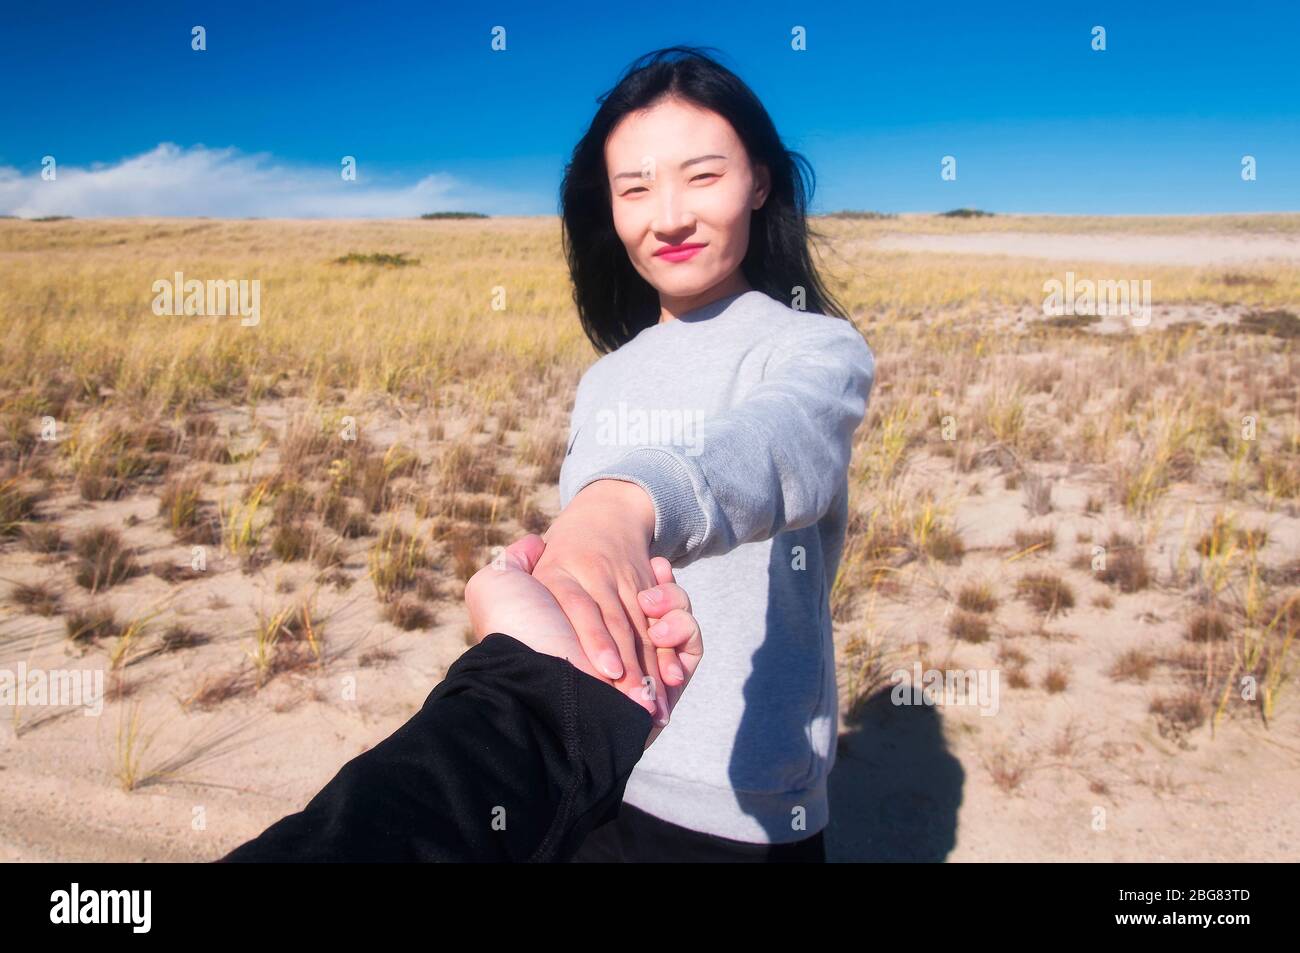 A chinese woman holding hands with a man focus point on the hands with blurred face on within the national seashore scenic area in Cape Cod, Massachus Stock Photo